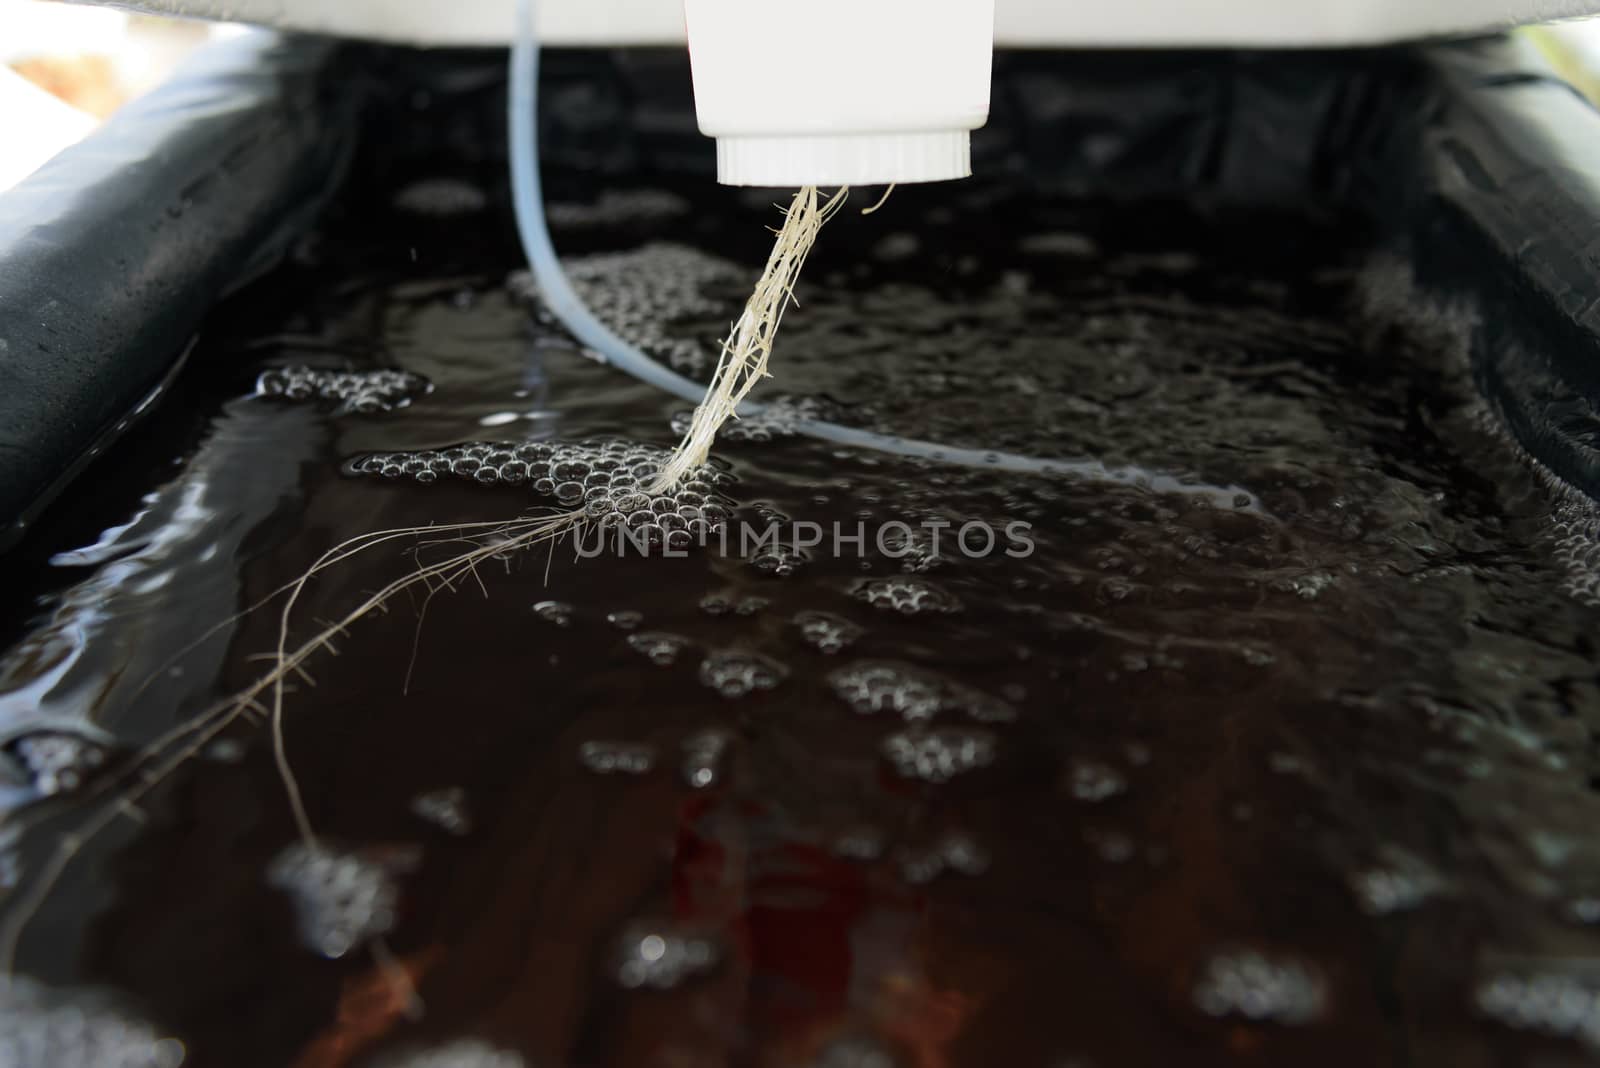 root of melon tree in the water bin of hydroponics system by rukawajung